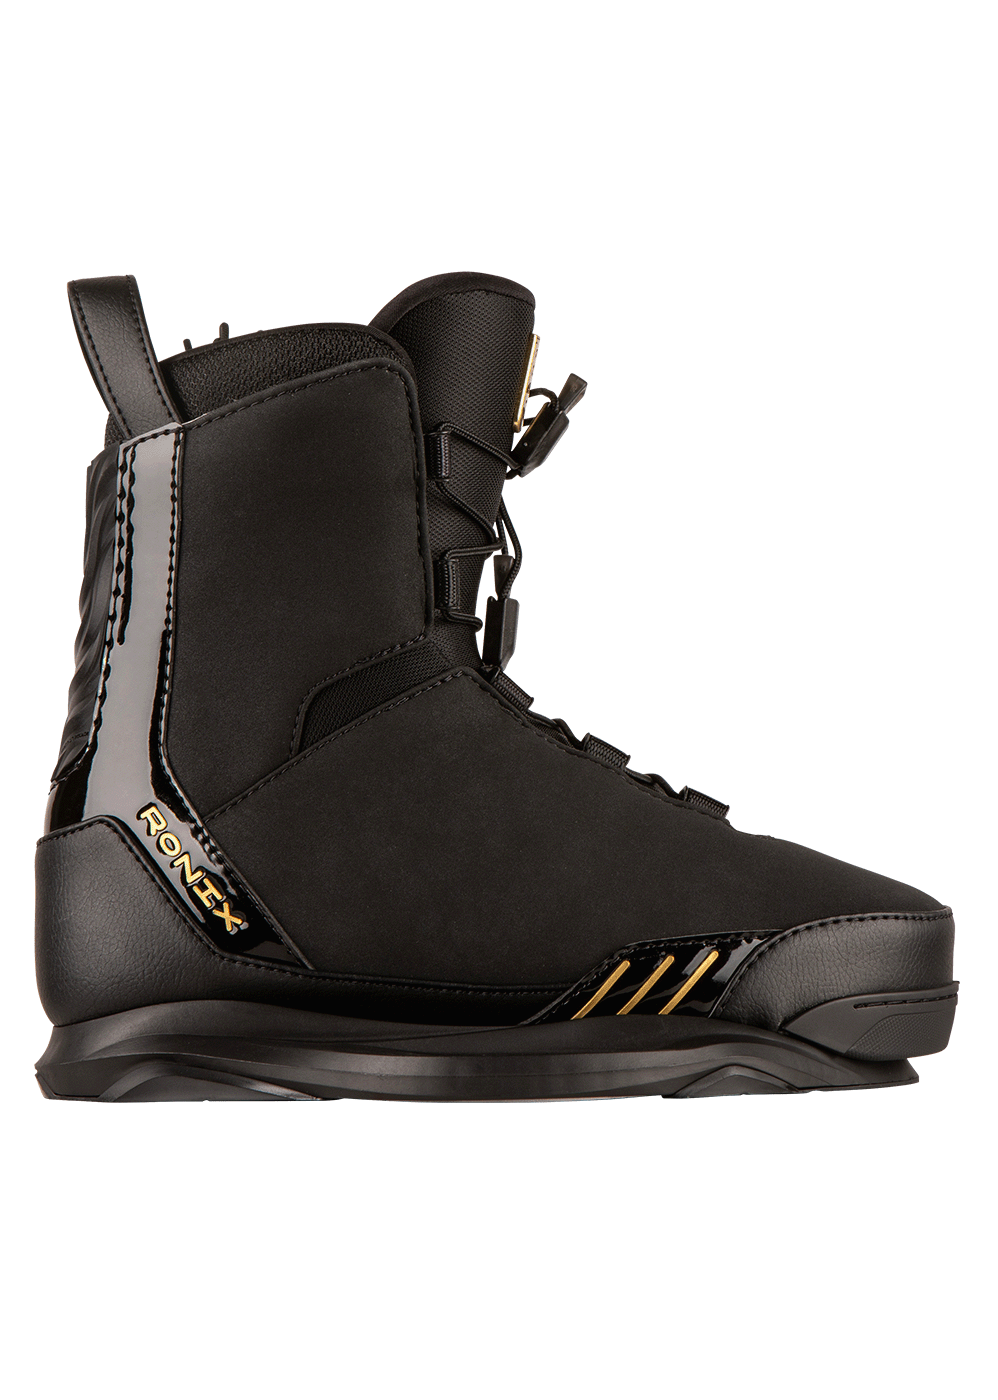 RONIX Rise - Intuition (Black / Gold)